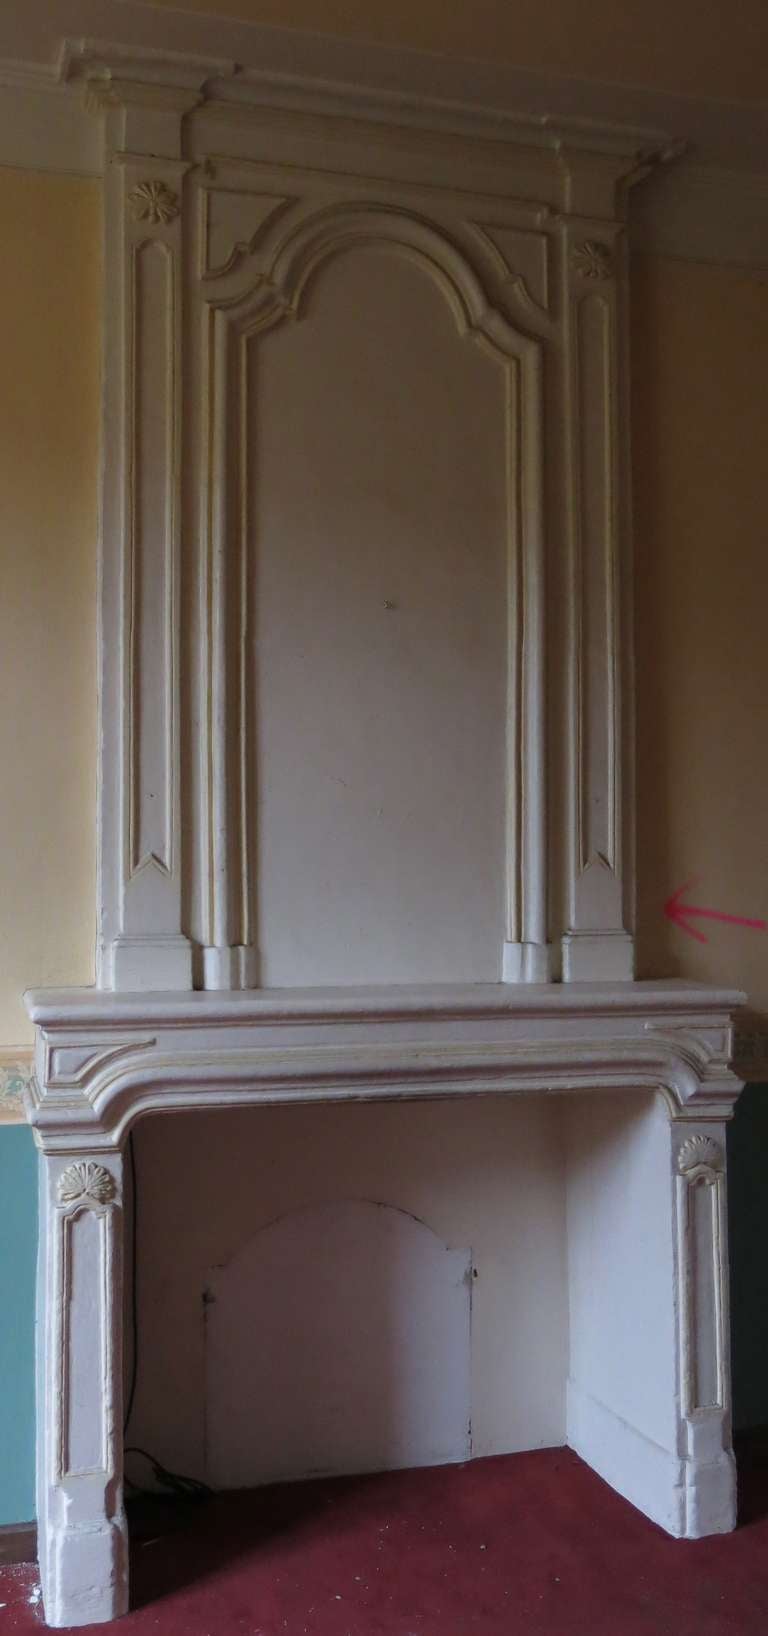 Rare and exceptional quality French antique (original) fireplace with trumeau (Top), excellent quality of work (handcrafted in the 17th century in France).
Please, check the quality of each corner of this rare fireplace. You will realized the